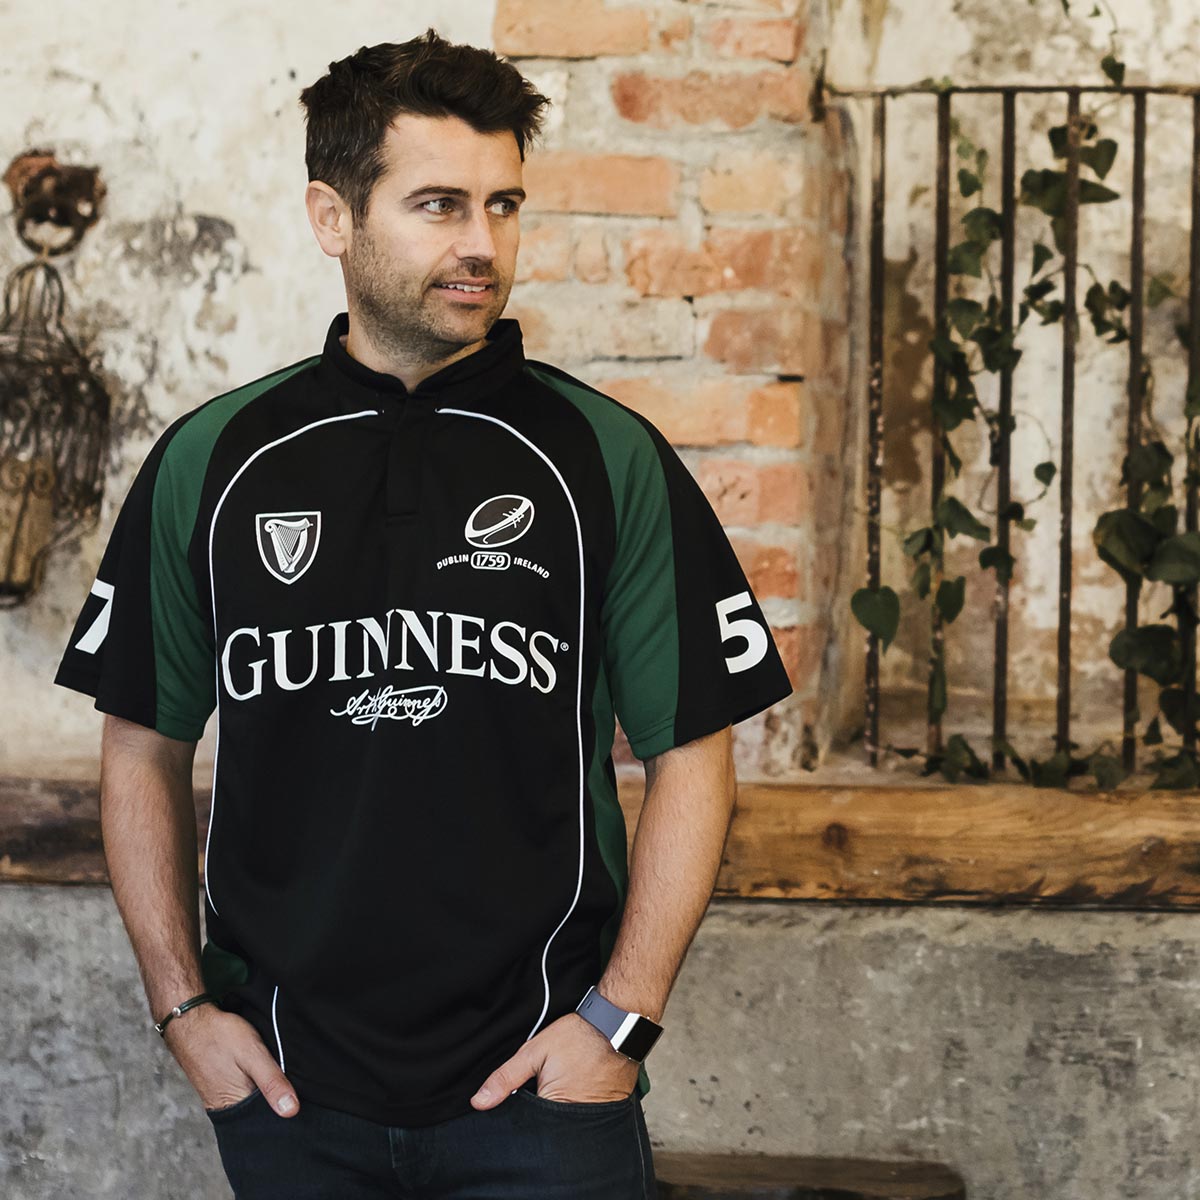 A man sporting a Guinness Short Sleeve Performance Rugby Jersey.